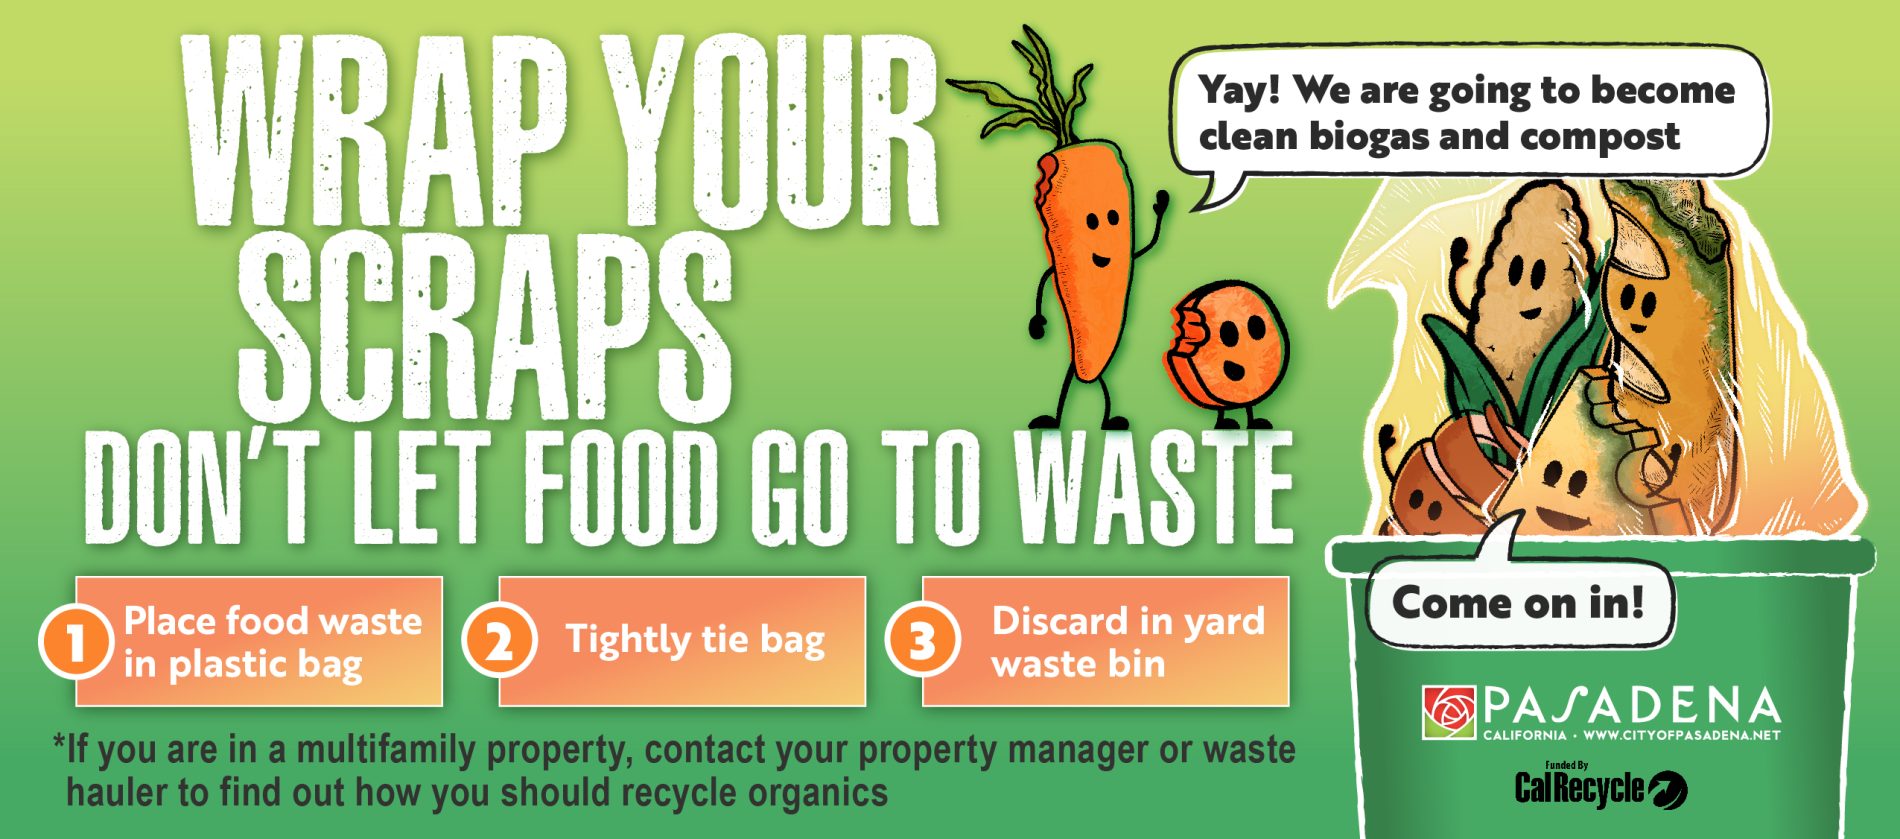 Pasadena City Flyer for participating in organic waste disposal program